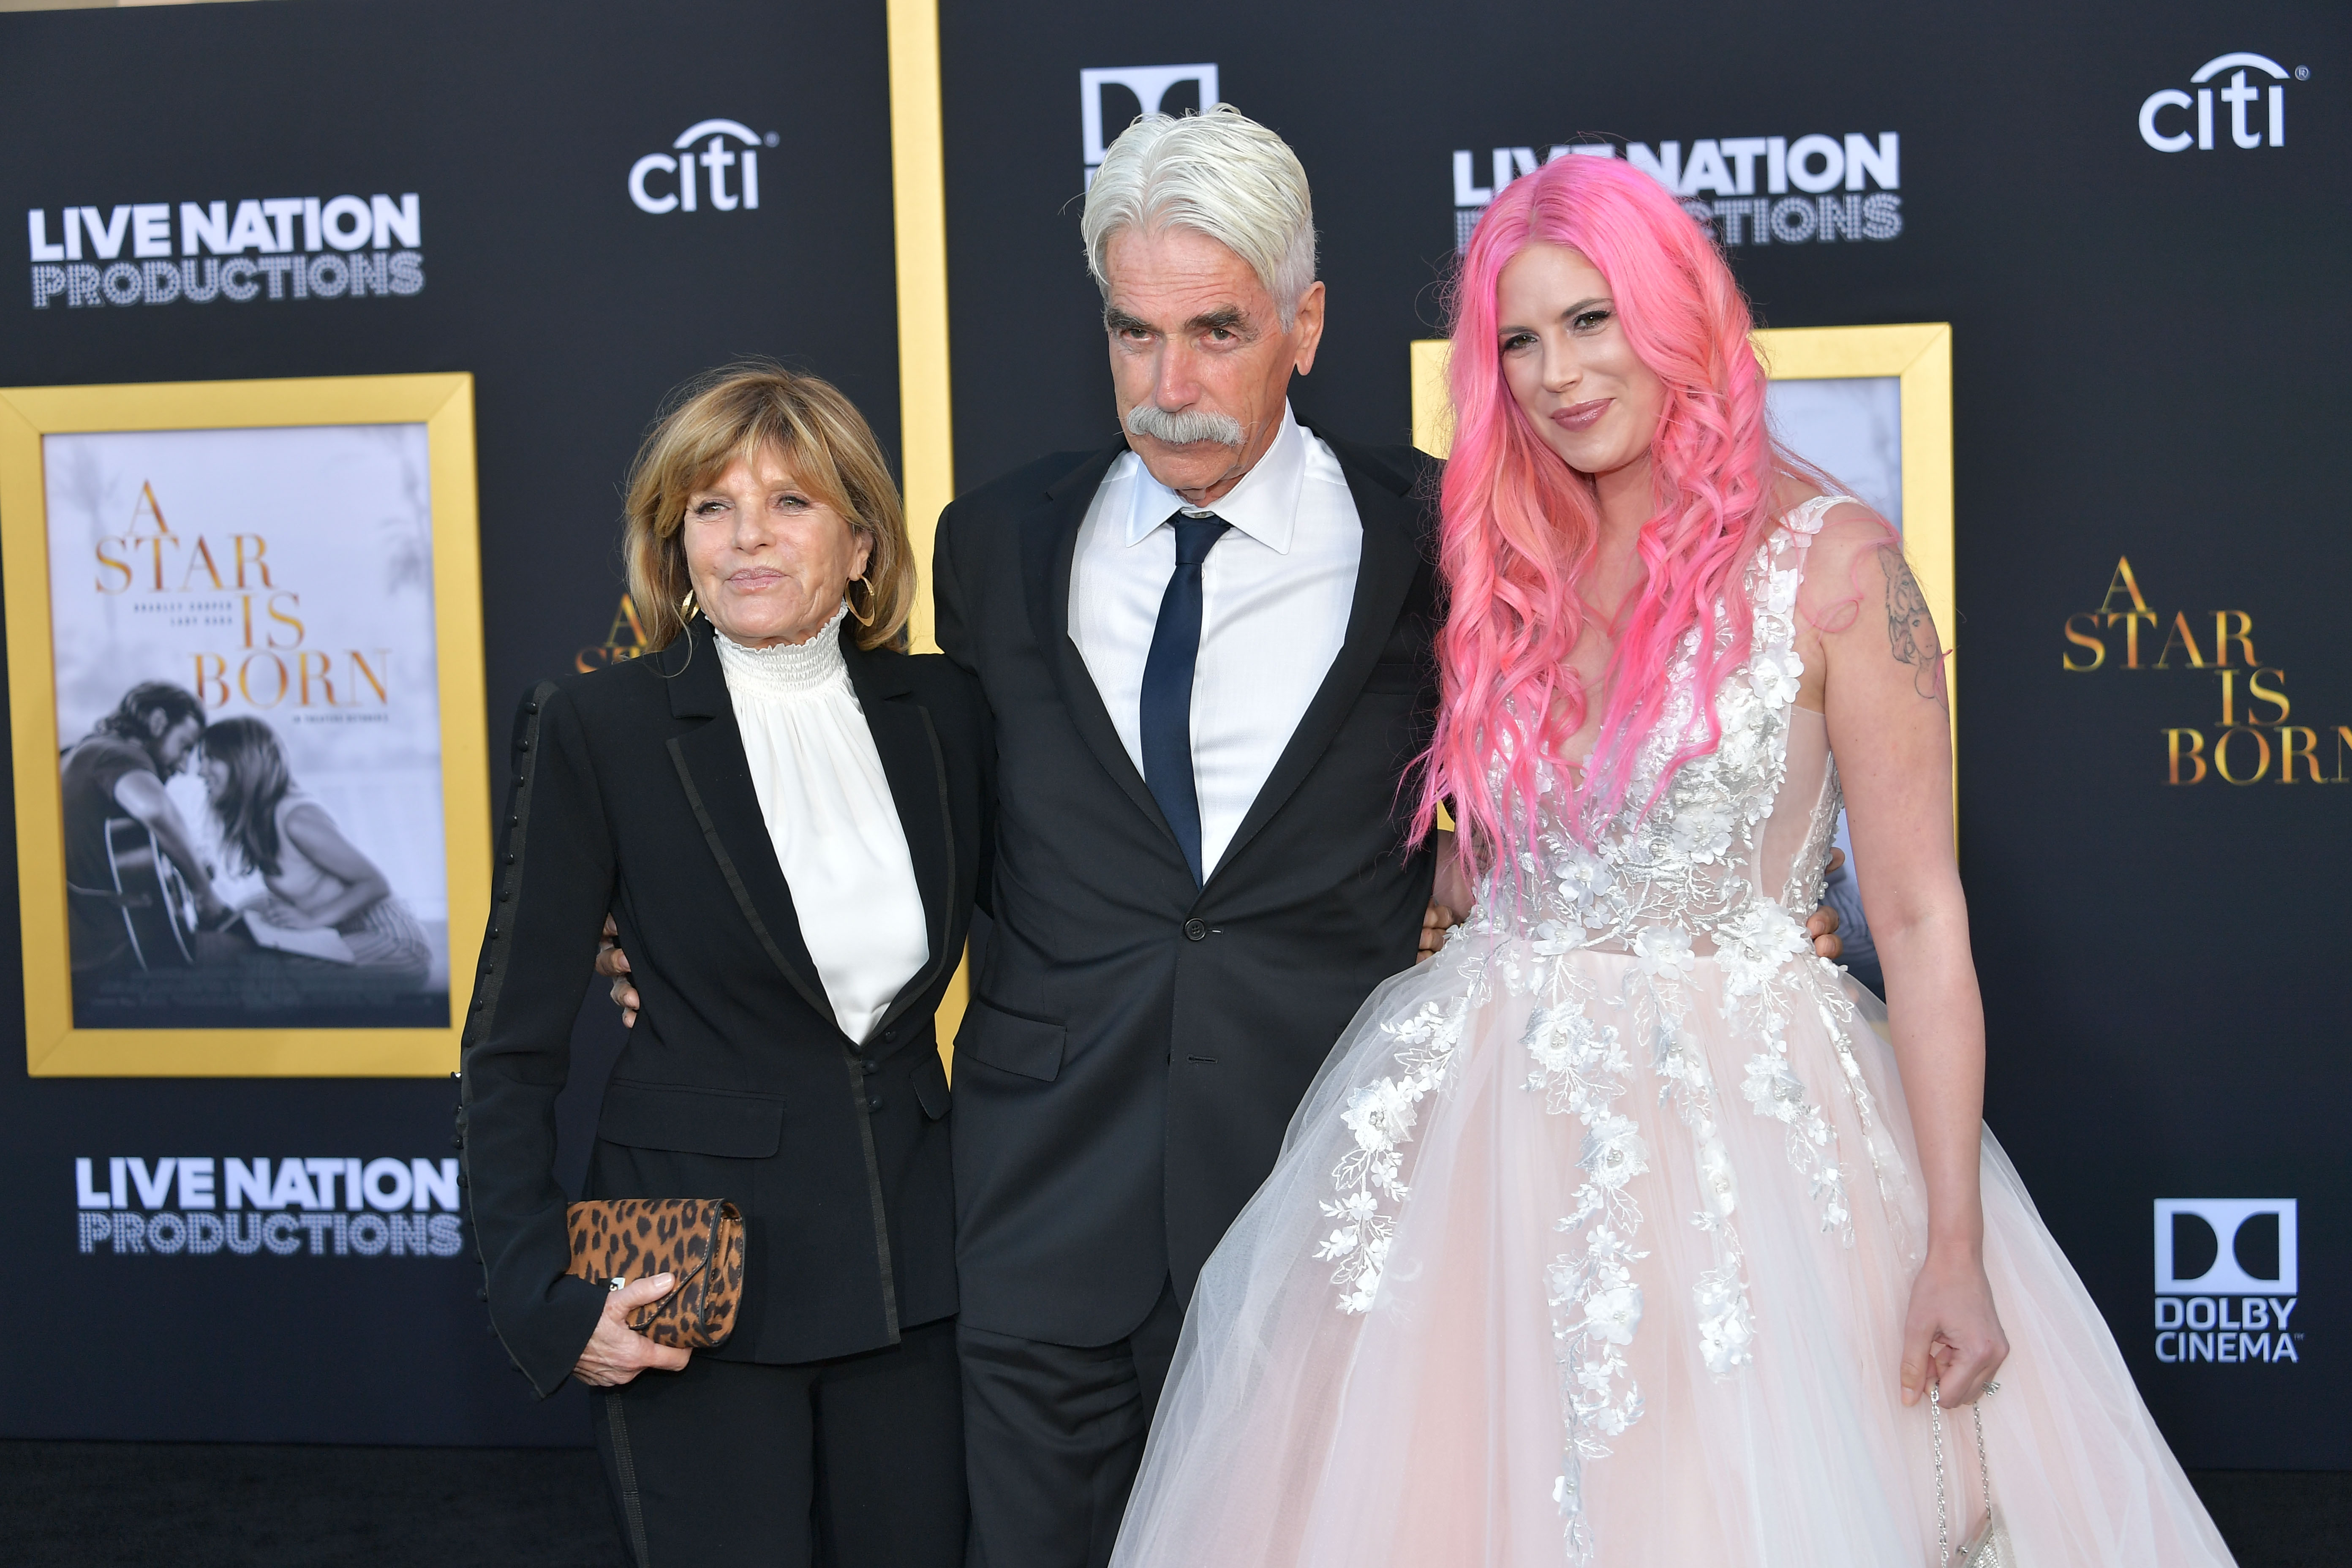 Katharine Ross, Sam Elliott, and Cleo Rose Elliott at the premiere of "A Star is Born" on September 24, 2018, in Los Angeles, California | Source: Getty Images